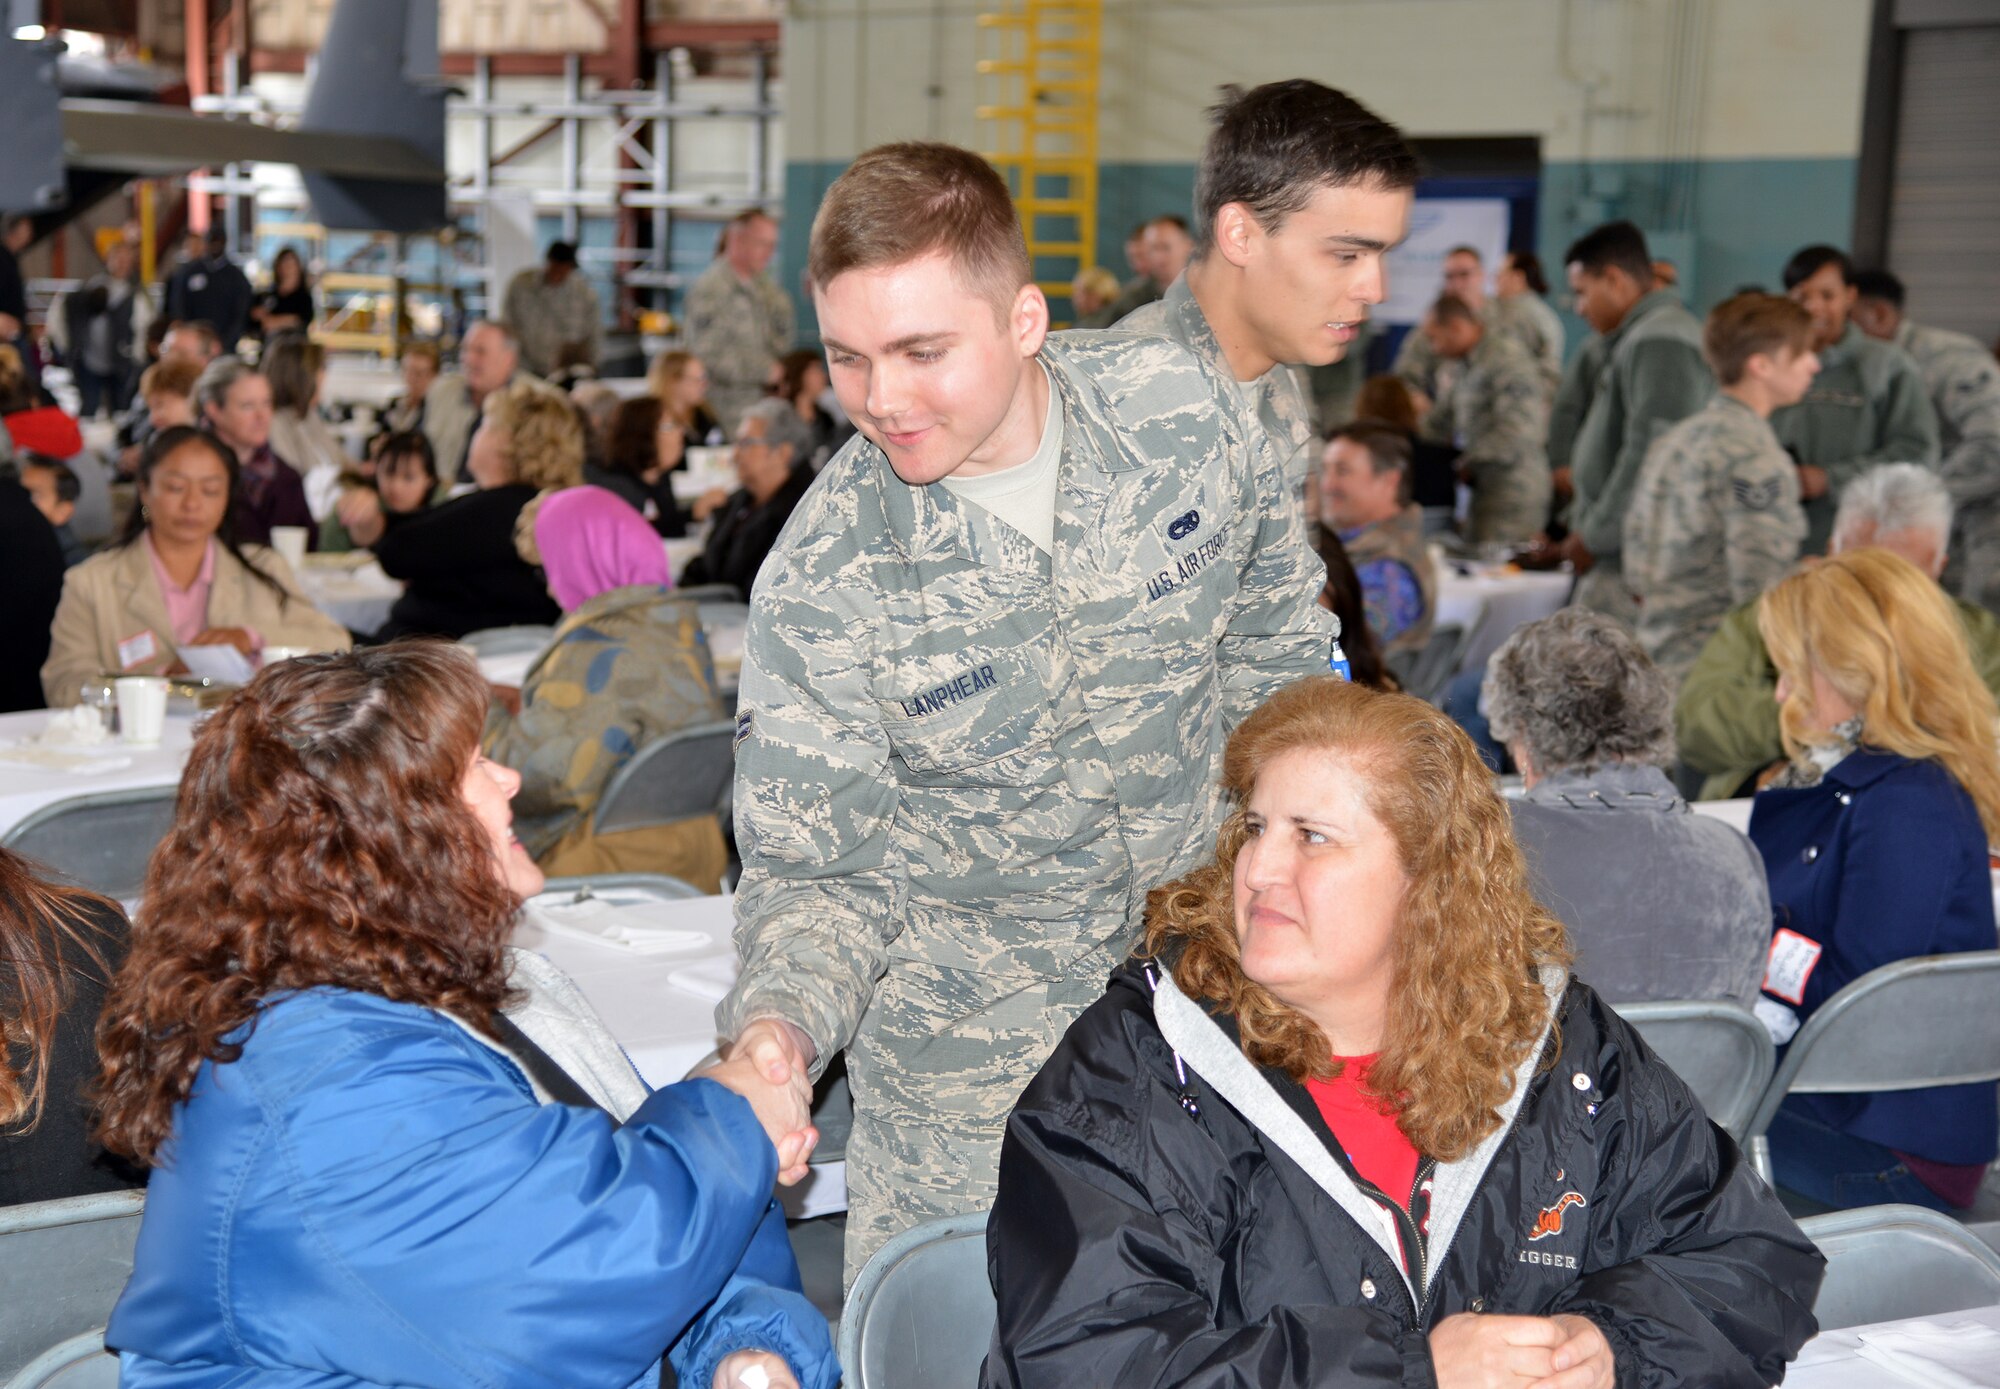 Airman 1st Class Shawn Lanphear, 58th Maintenance Group, presents a commerorative coin to guest Sheryl McGartland as Aurora Garcia looks on. The coining concluded the Warriors to Warriors event, conducted to raise awareness and encourage people in the fight against Ovarian Cancer April 29 at Hanagar 1000. 